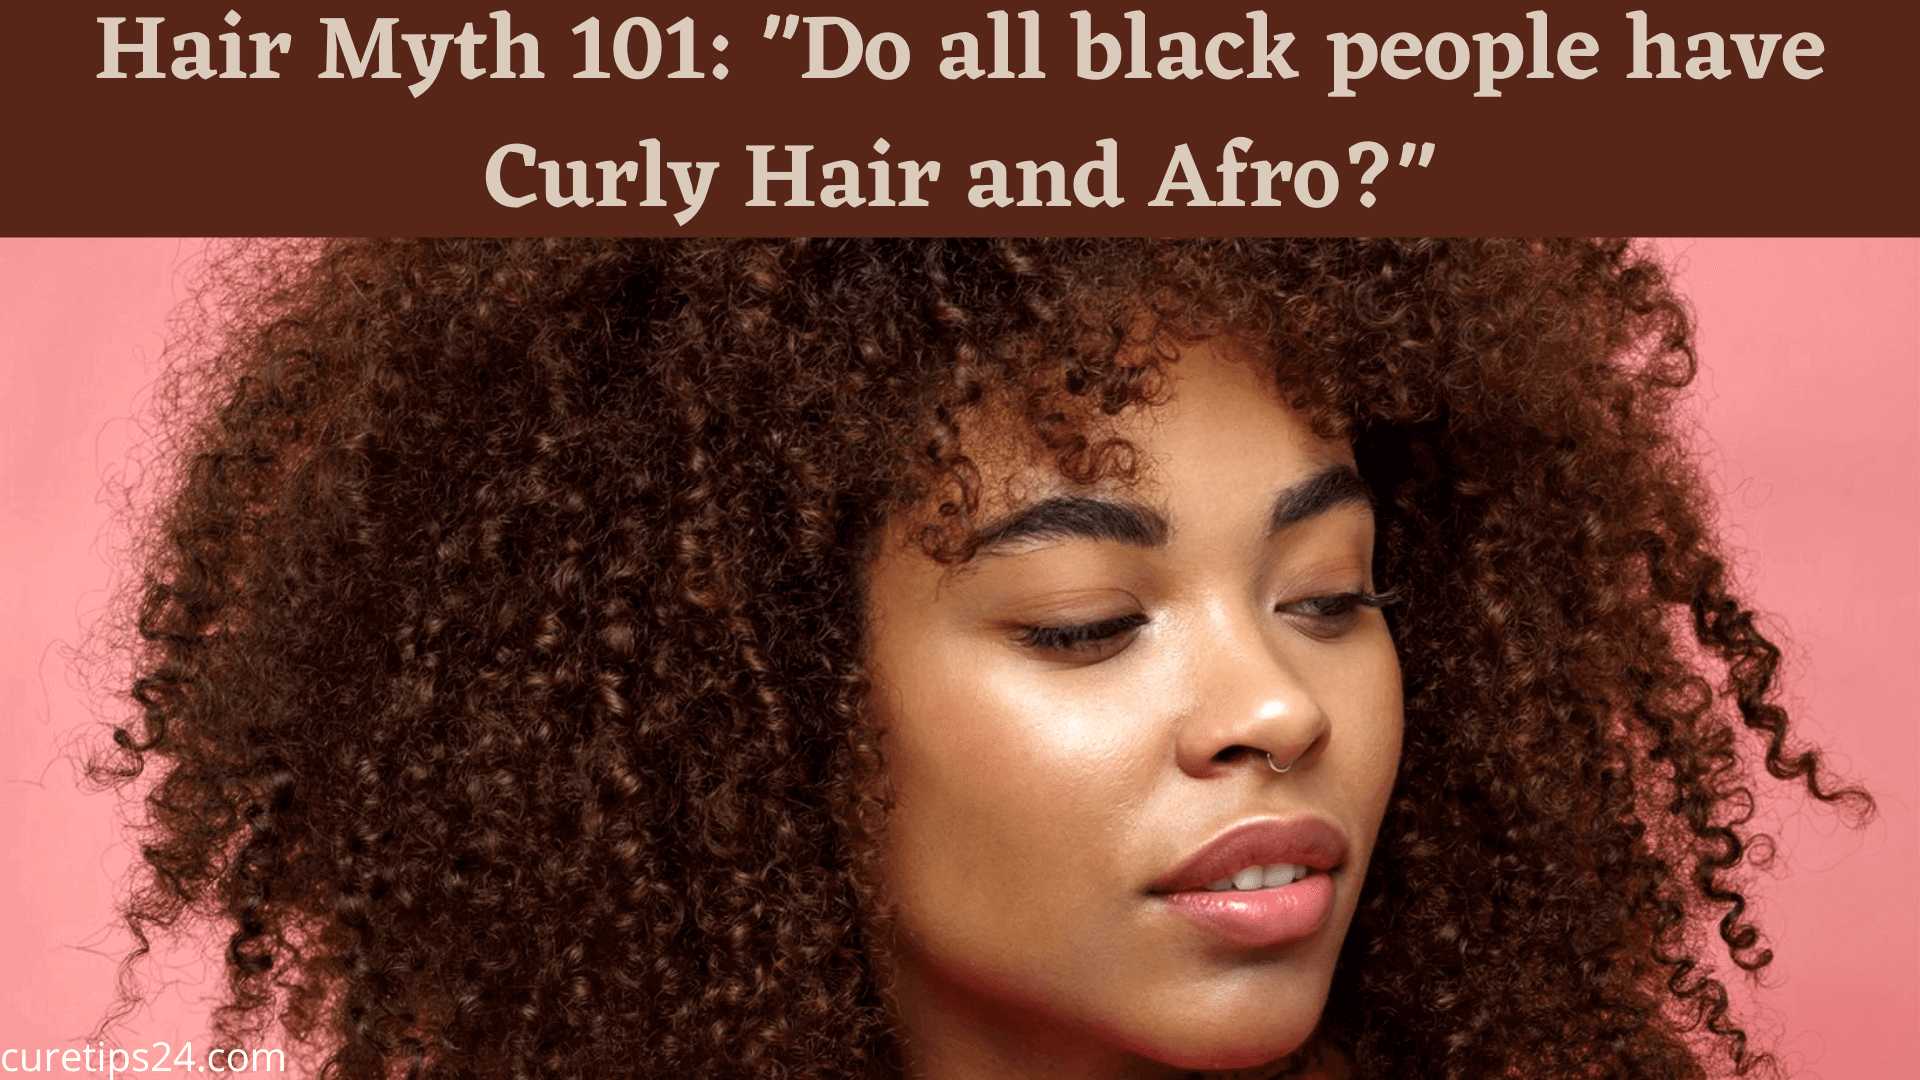 Do all black people have Curly Hair